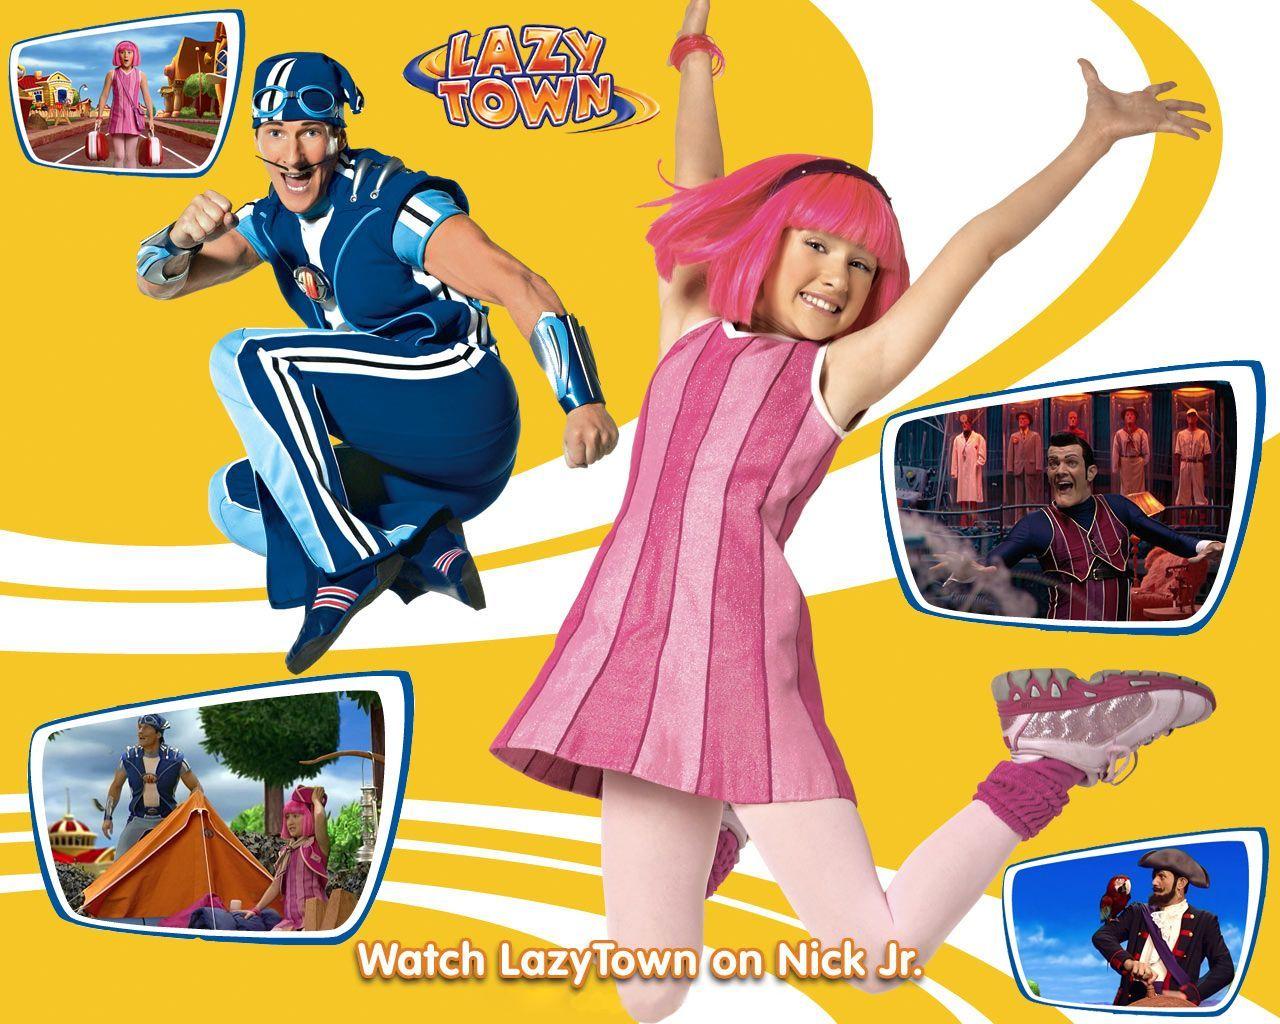 Nickelodeon Shows. Home ›› Lazy Town Wallpaper ›› Lazy Town Nick